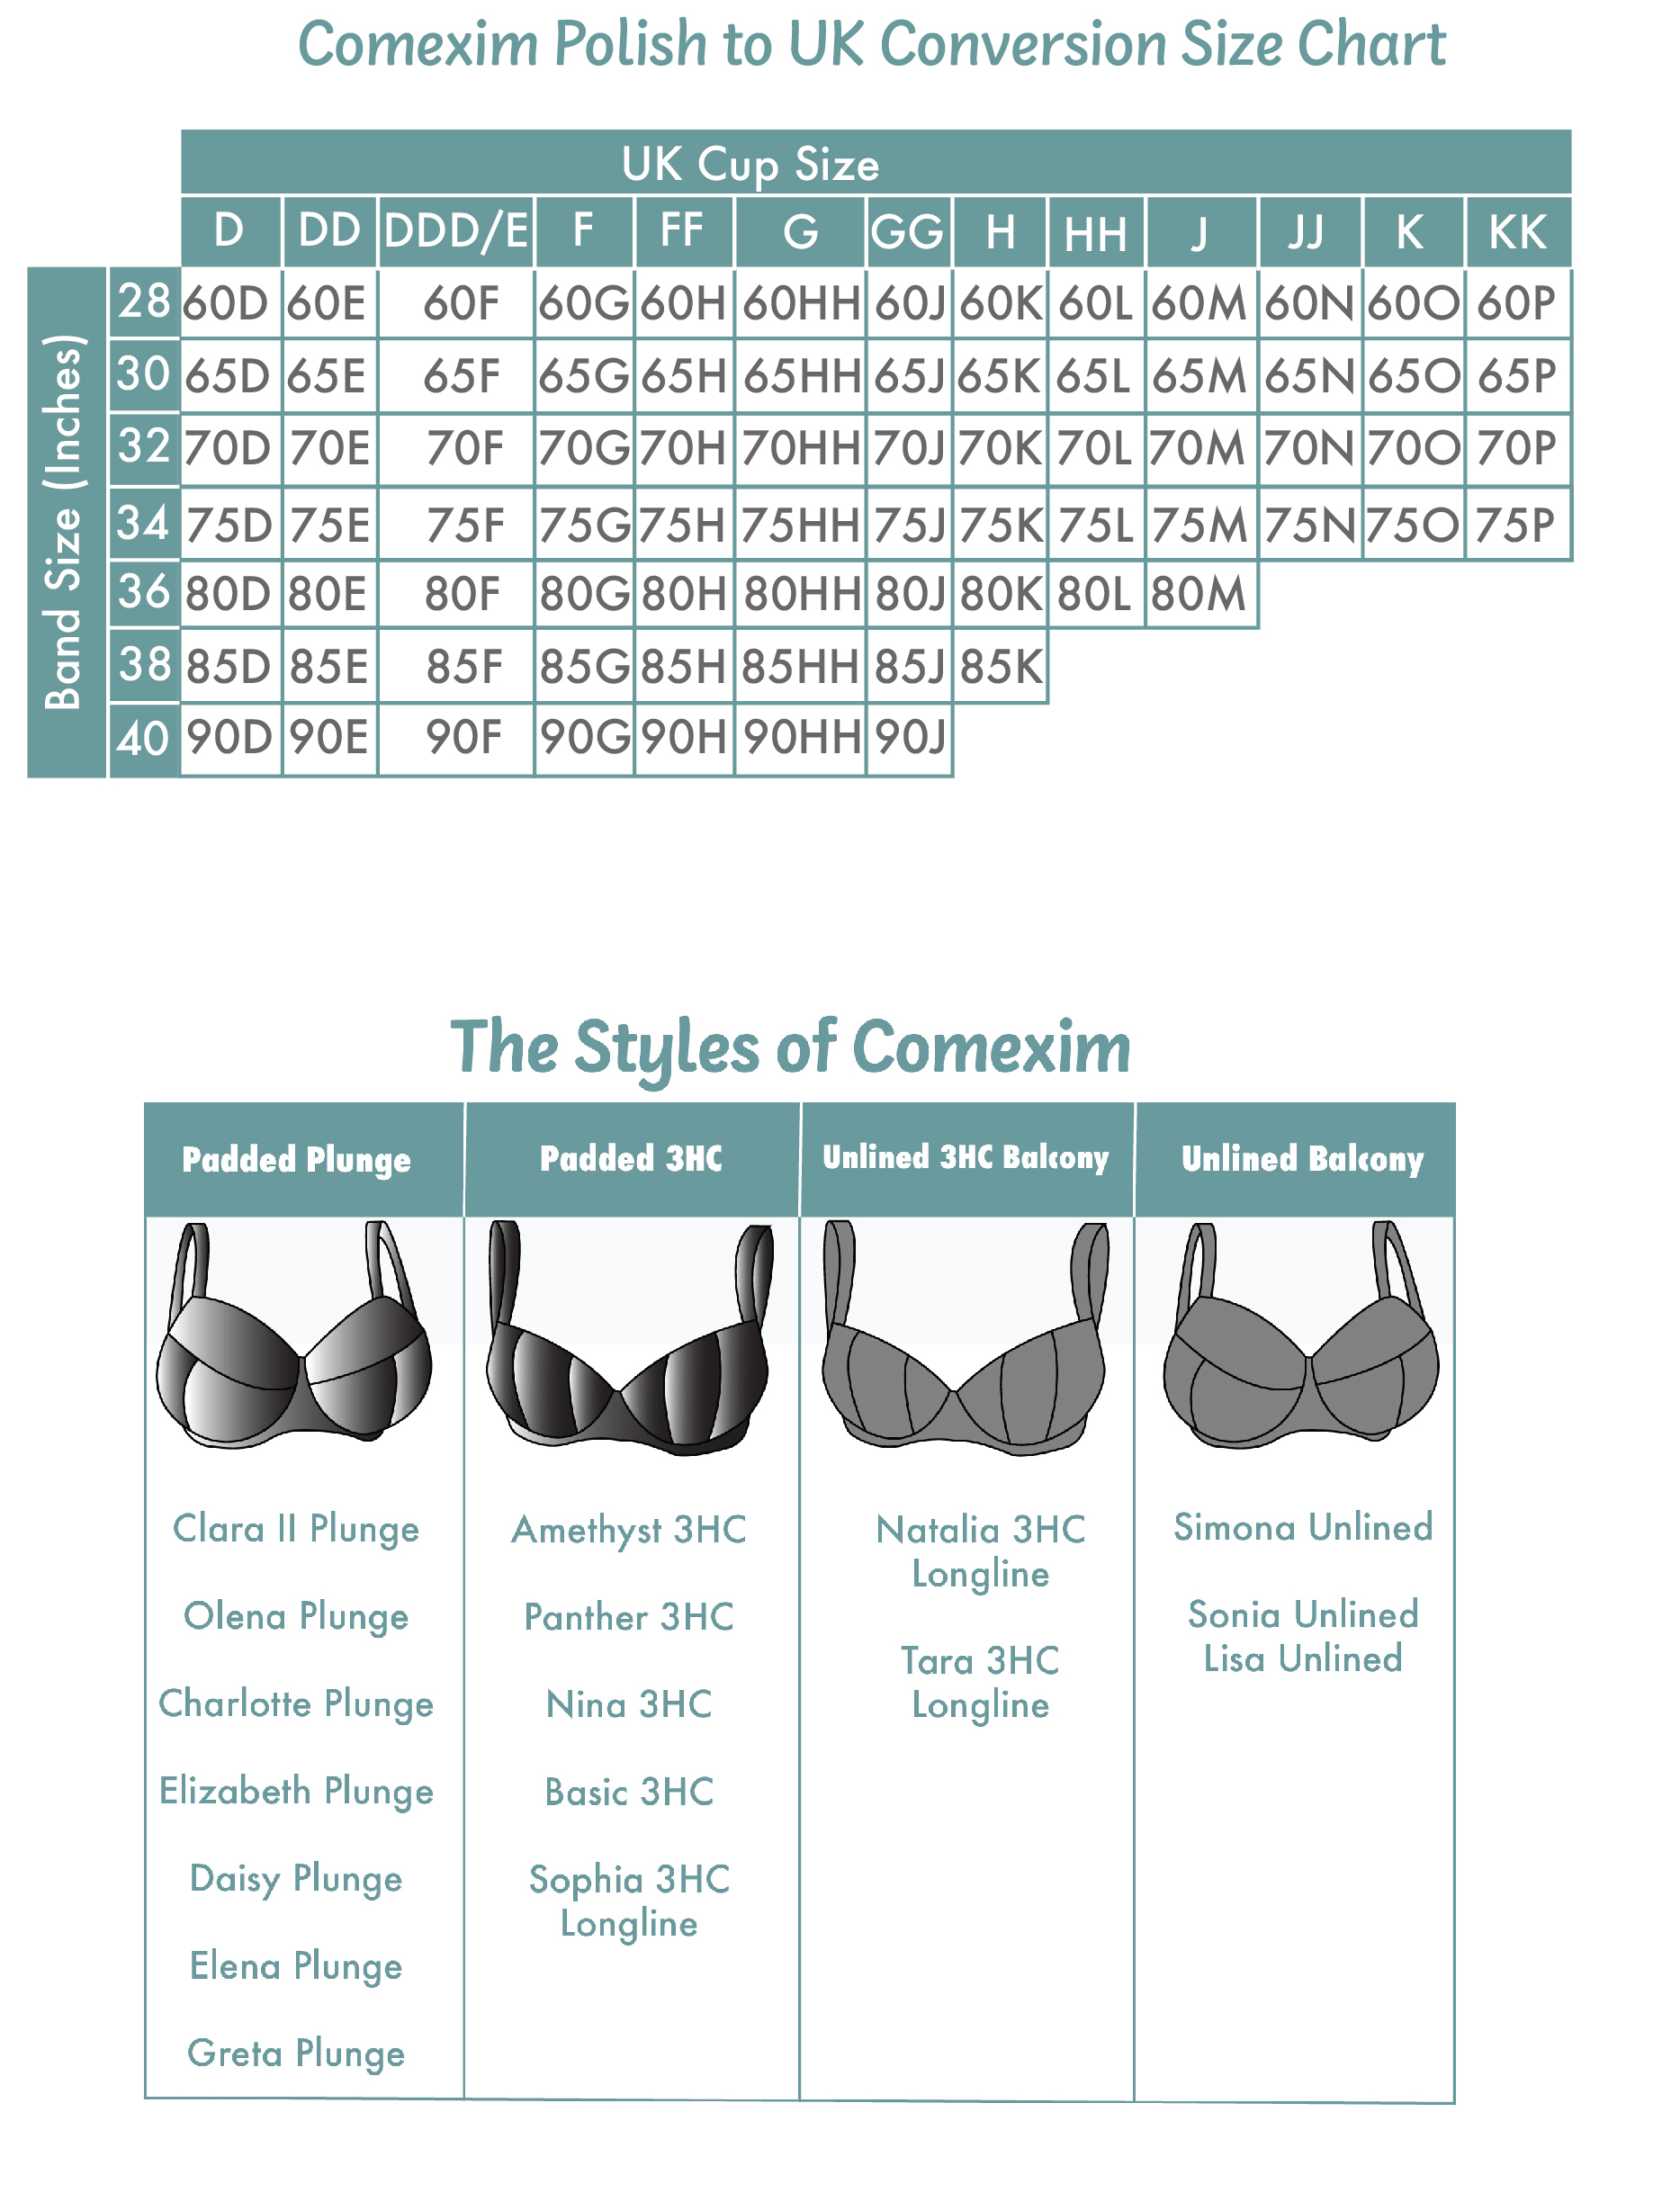 Cup Sizes Explained: Ultimate Guide to Your Bra and Breast Cup Sizing -  HauteFlair